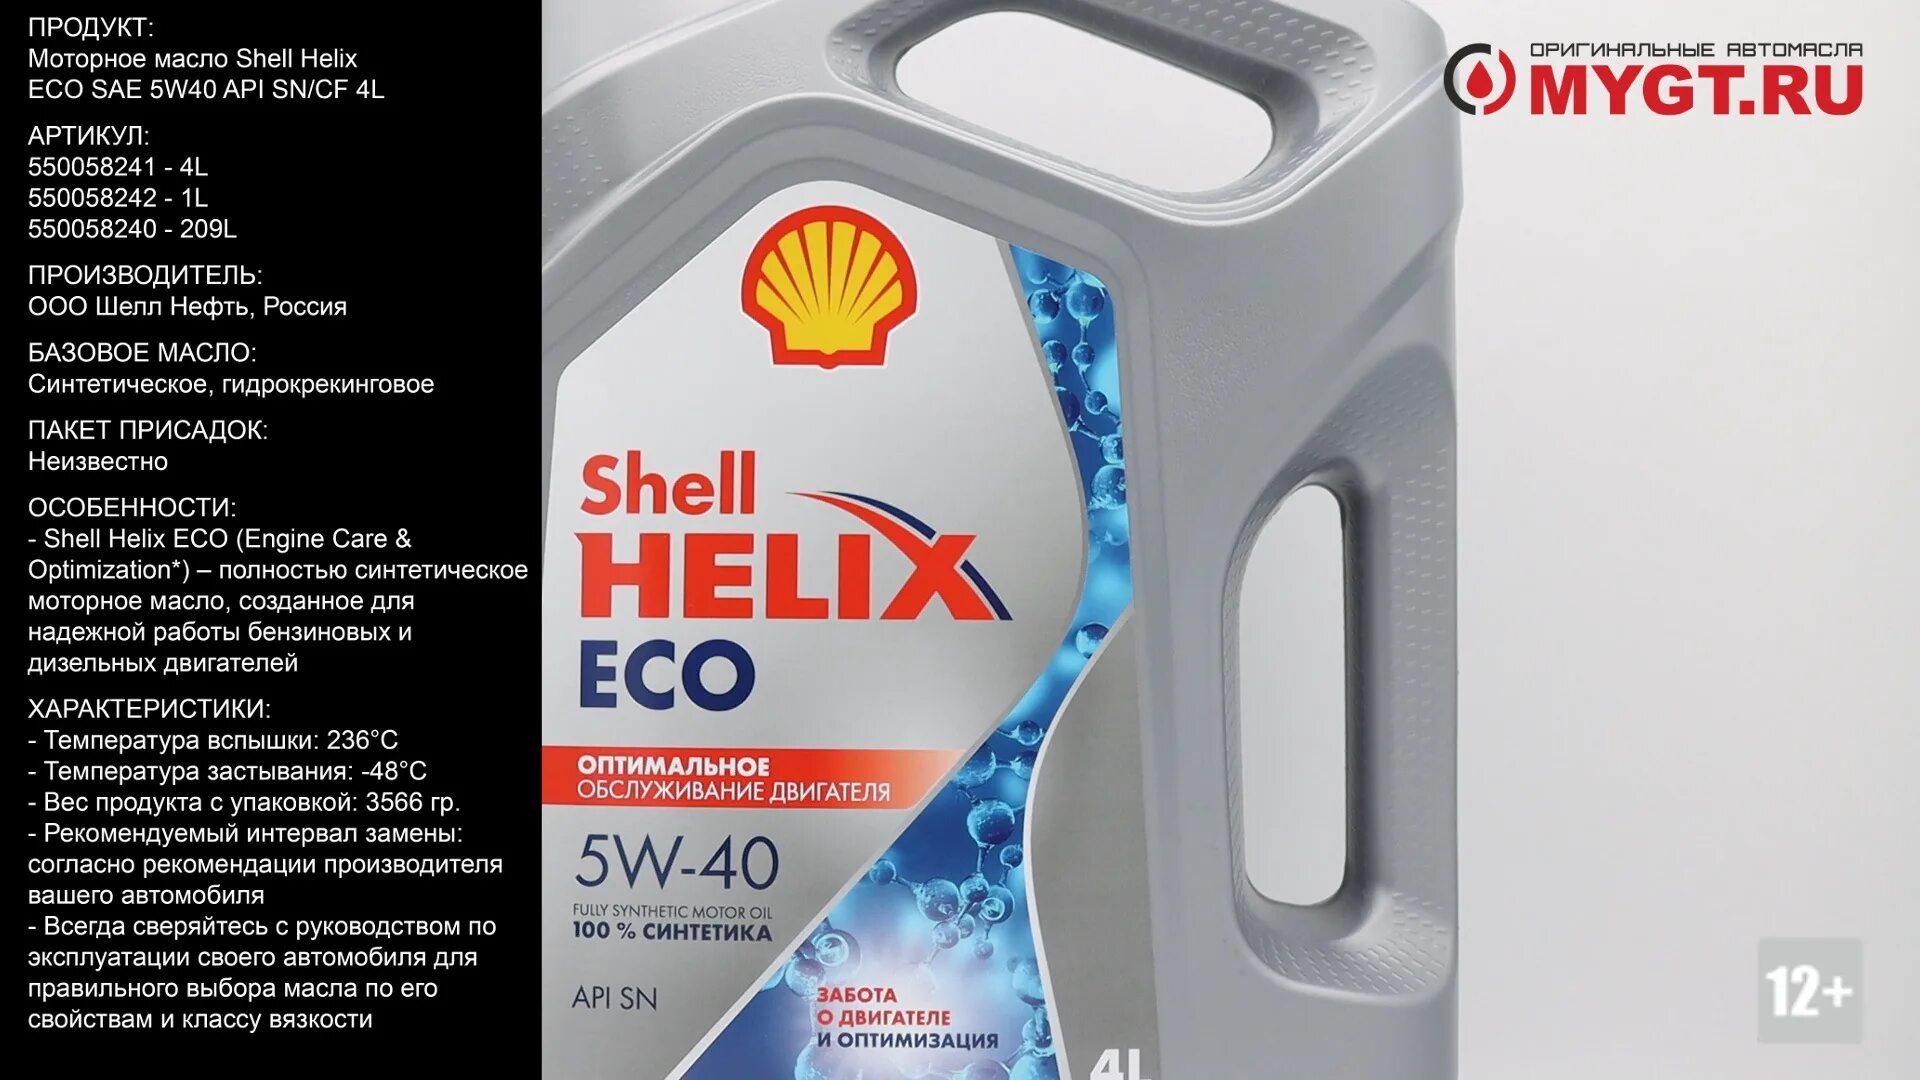 Масло Шелл 5w40 ЕСО. Моторное масло Helix Eco 5w-40 (SN) 4л. Масло моторное Shell Helix ЕСО 5w40 синтетика. Шелл эко 5w40 моторное масло. Моторное масло шелл хеликс характеристики